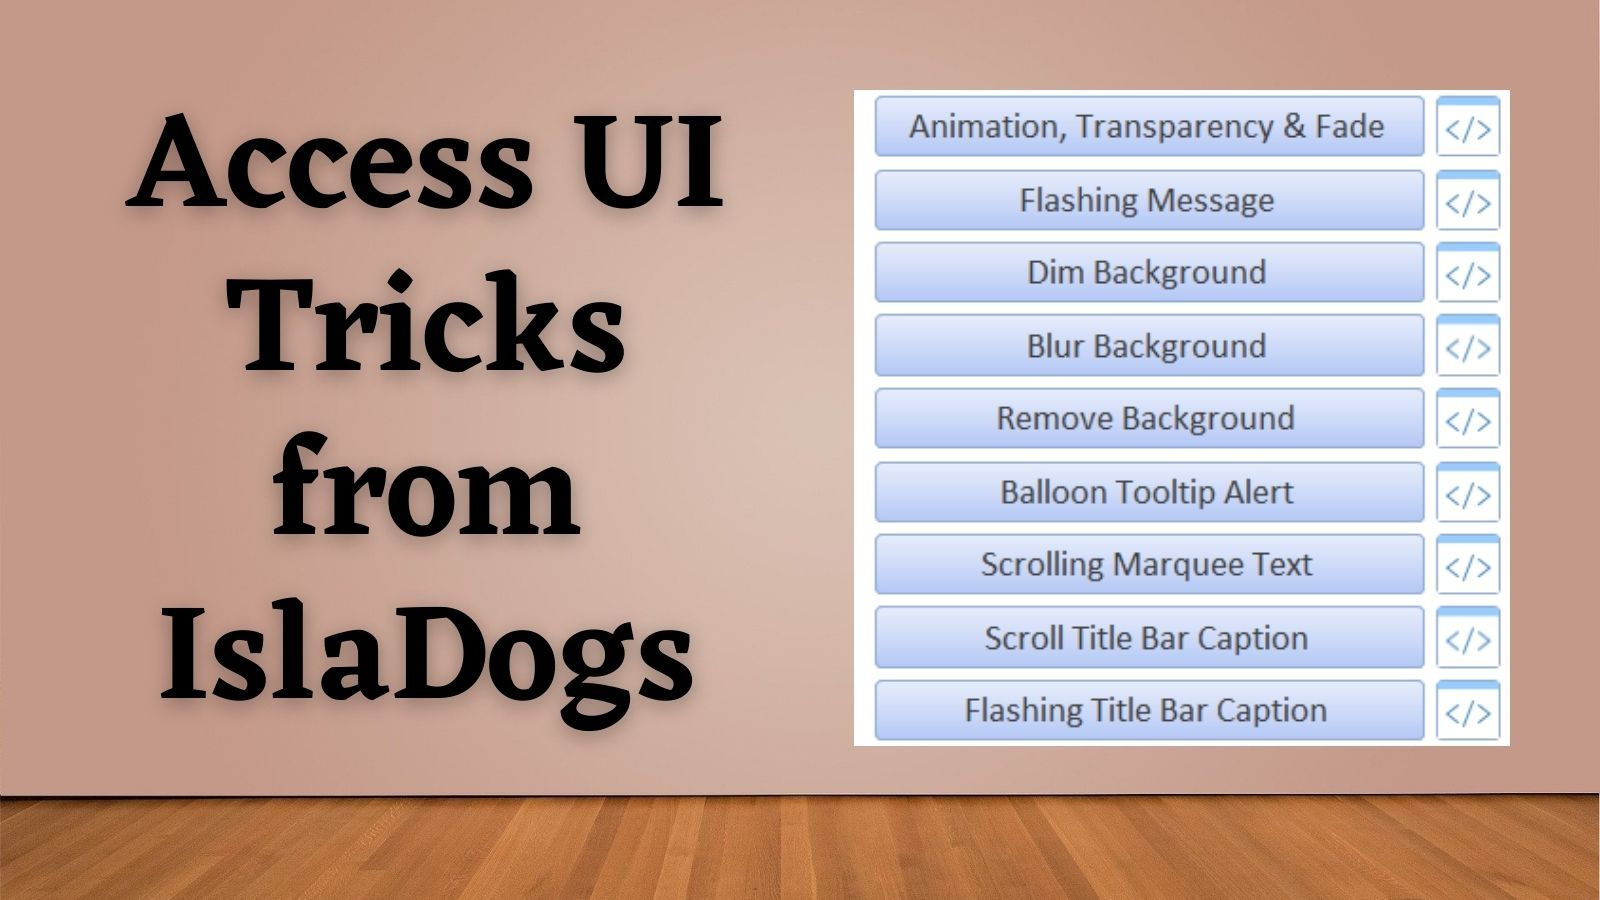 IslaDogs: Getting Creative with the Access Application Interface